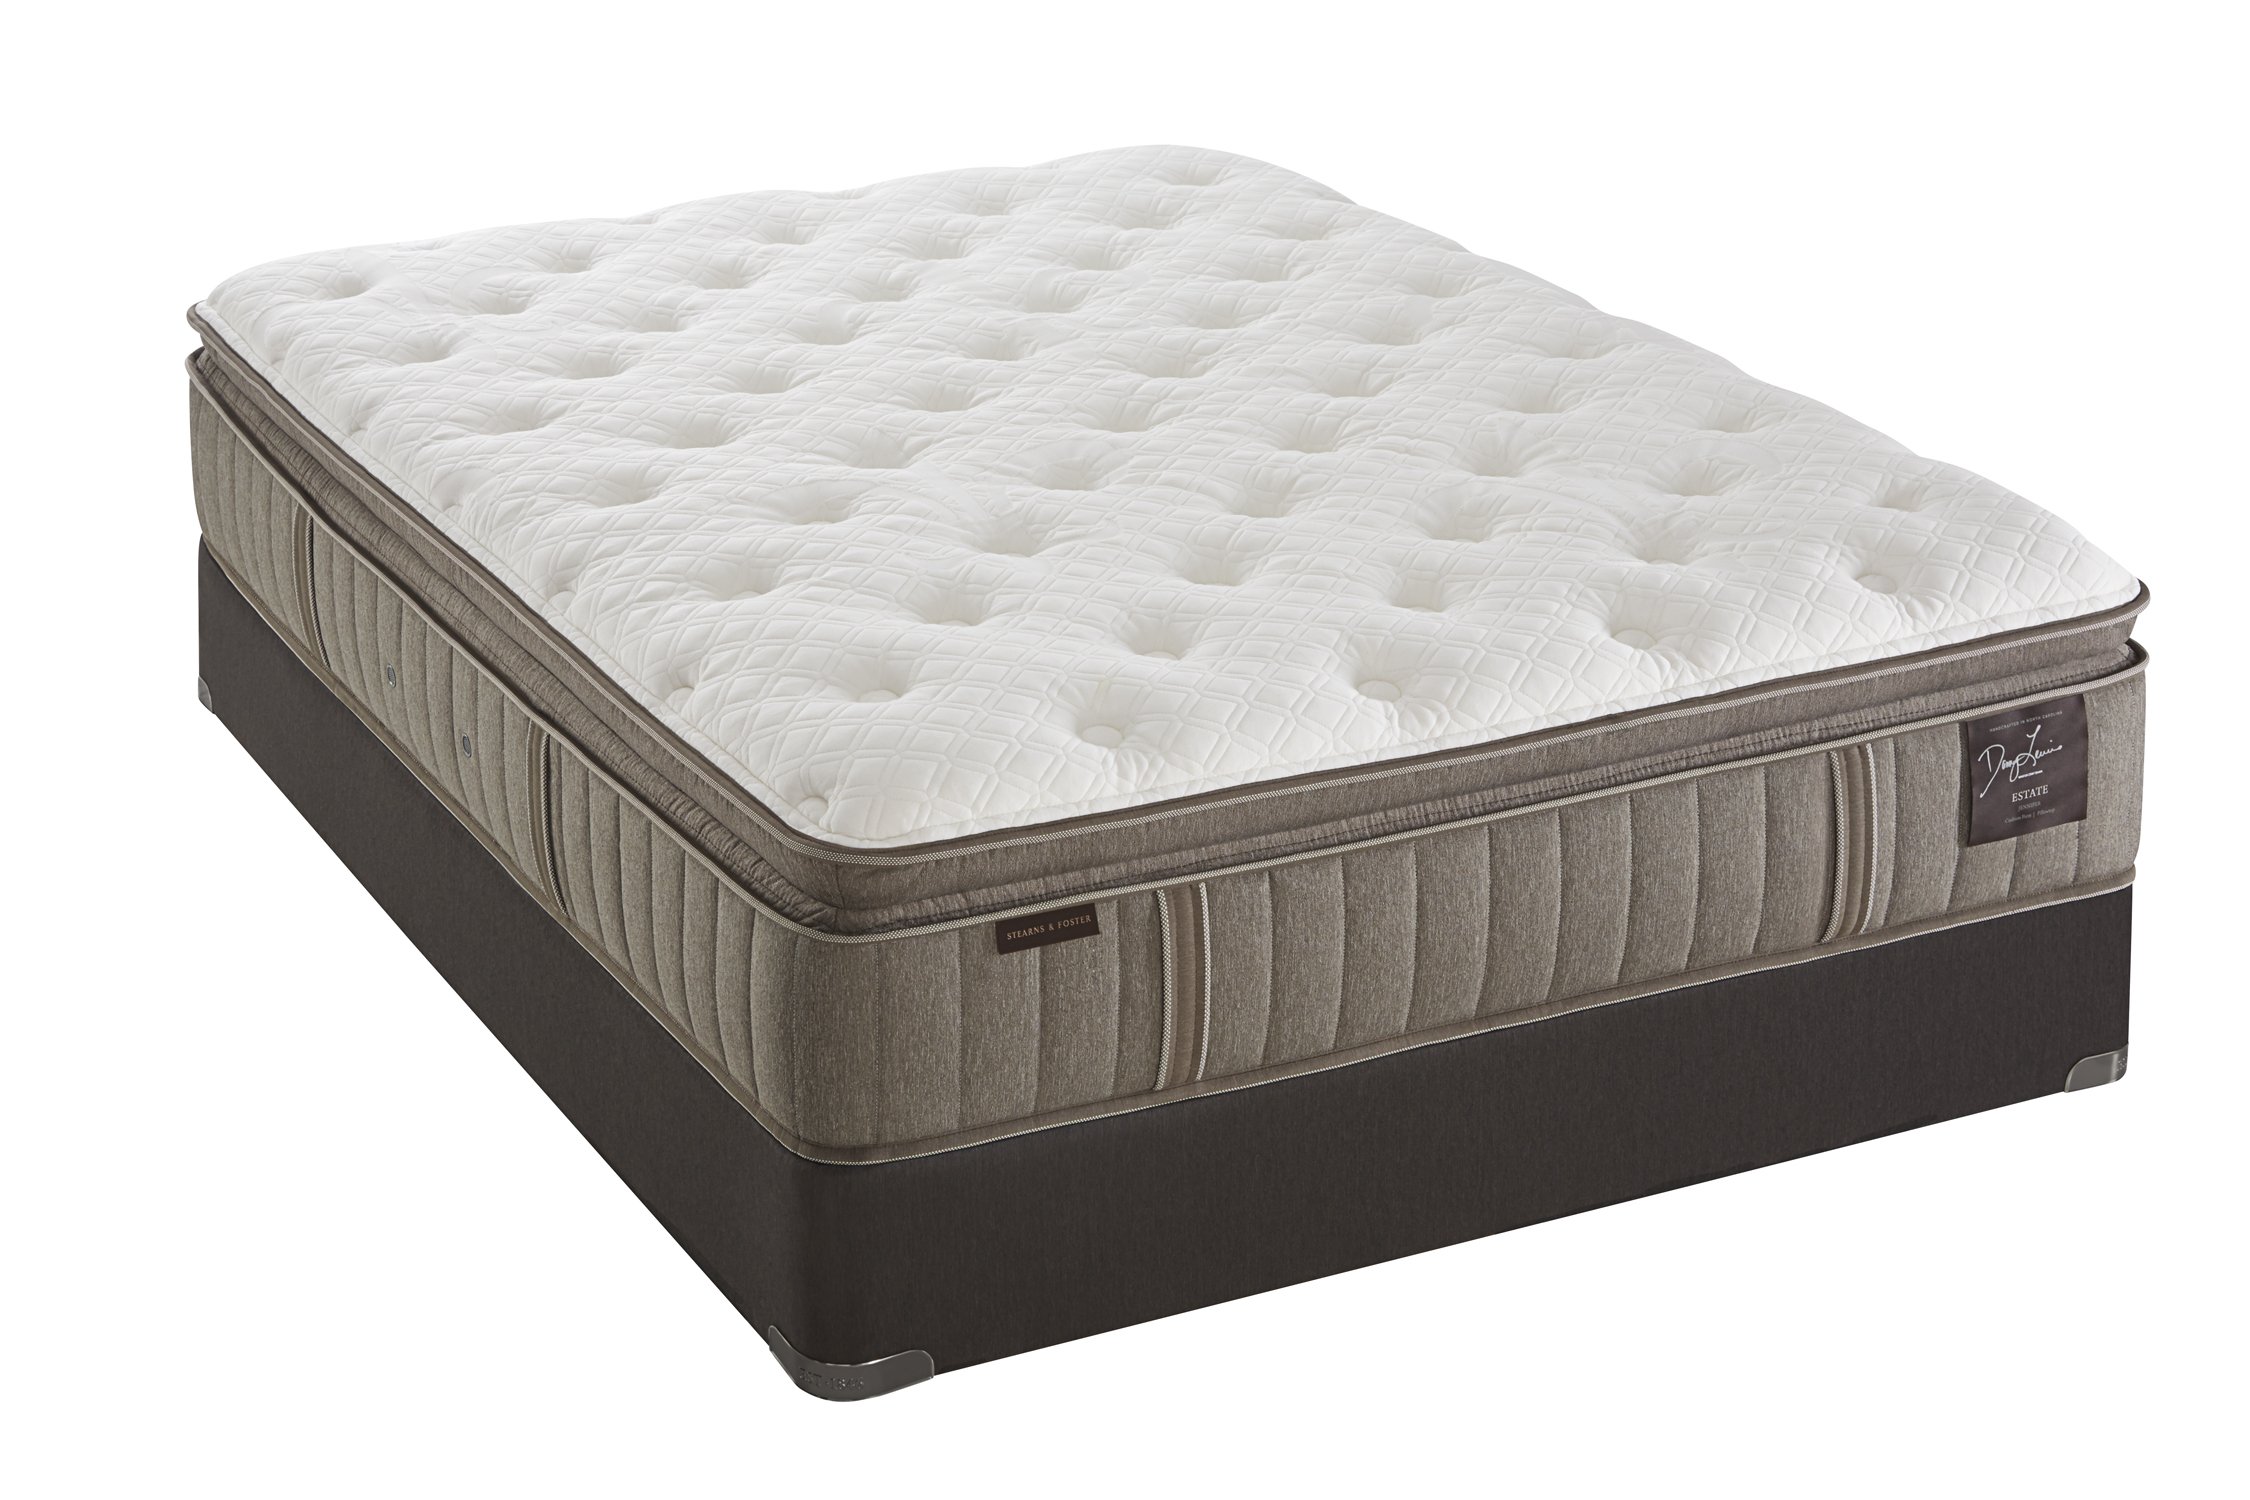 Stearns And Foster Mattresses Reviews : Stearns and Foster ...